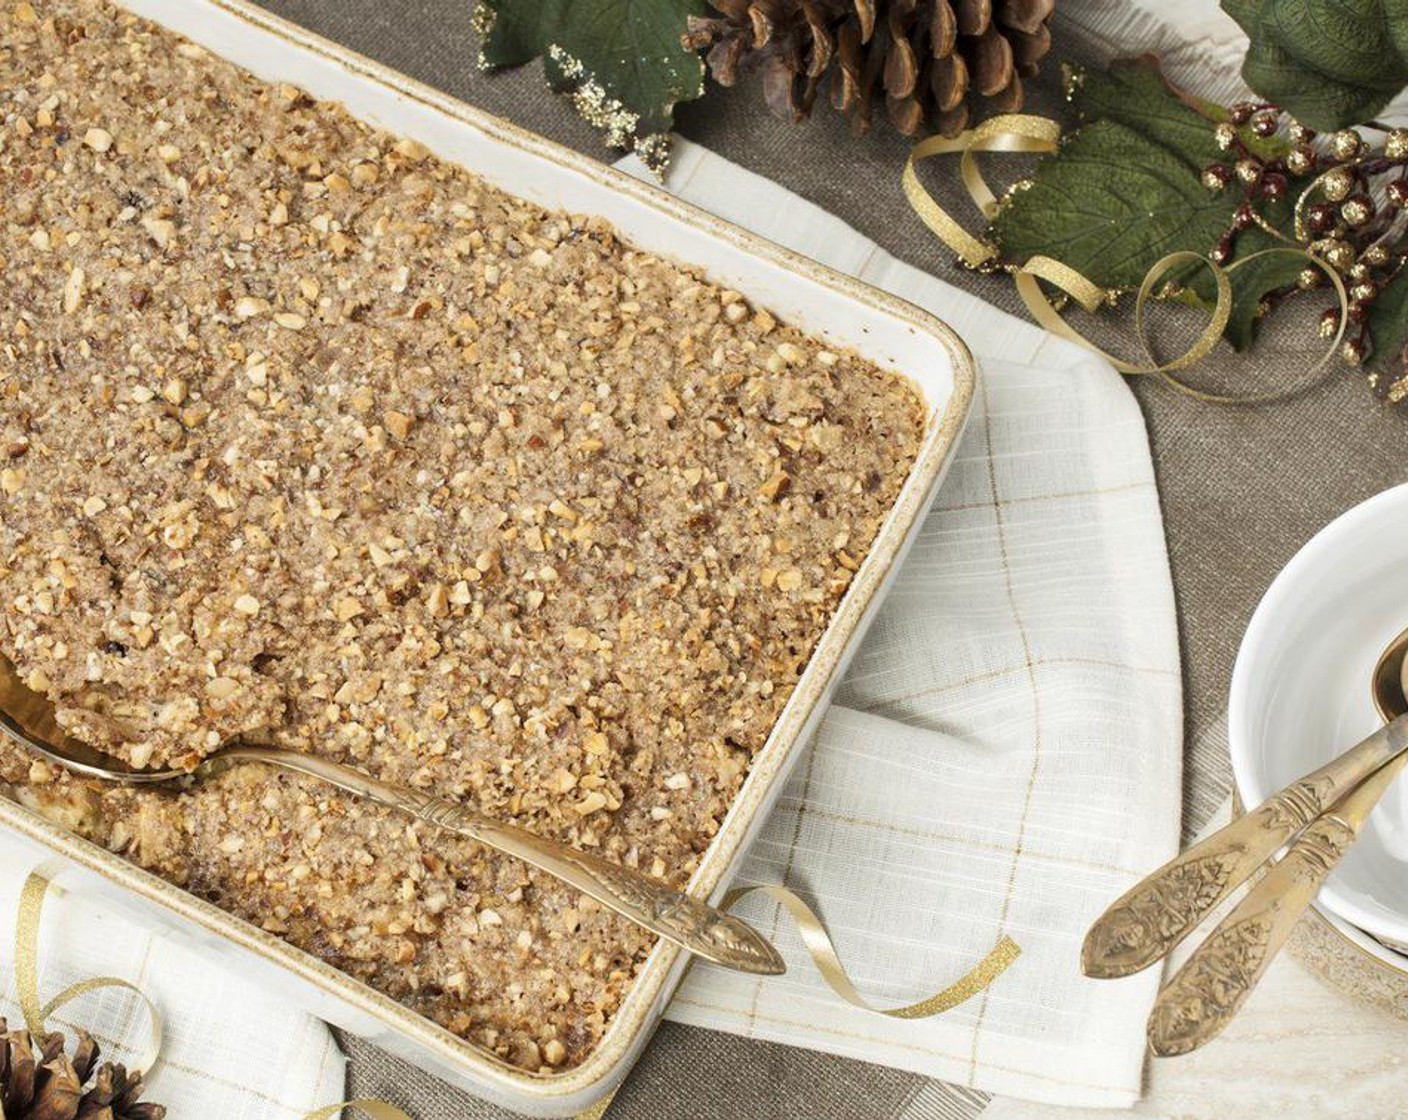 step 5 Combine Unsalted Butter (2 Tbsp), All-Purpose Flour (2 Tbsp), Brown Sugar (2 Tbsp), Ground Cinnamon (1/2 tsp), Assorted Nuts (1/4 cup) until crumbly using a fork, pastry cutter or mini food processor. Sprinkle evenly over oatmeal.